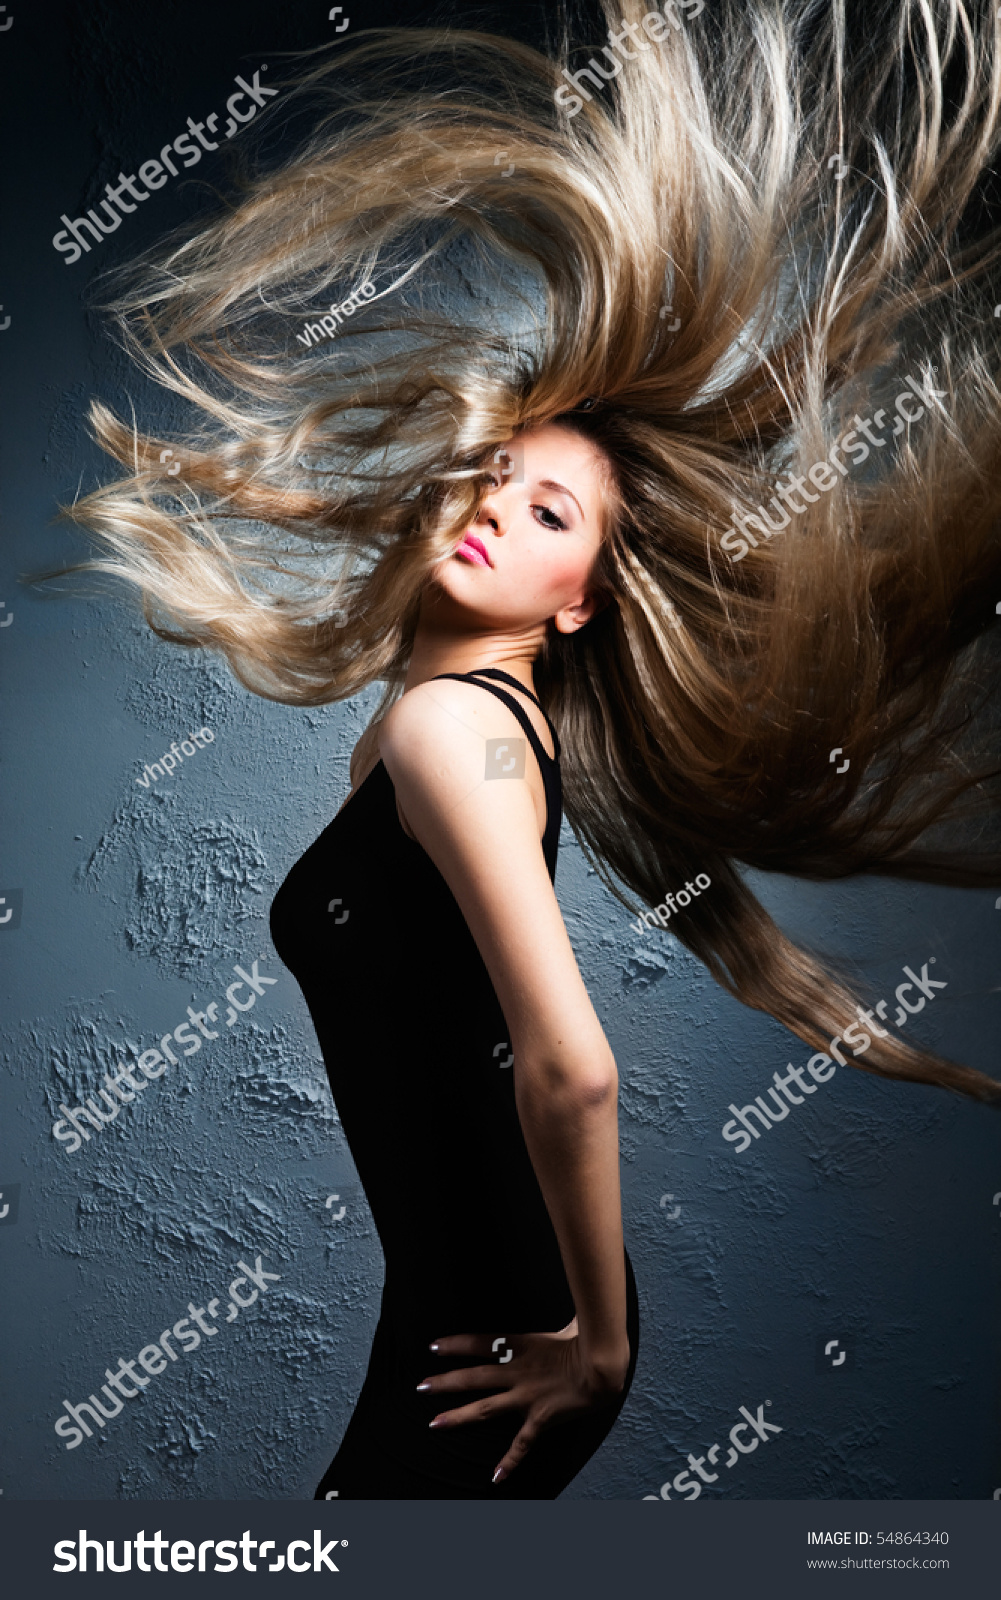 Beautiful Girl With Great Fly-Away Hair Stock Photo 54864340 : Shutterstock